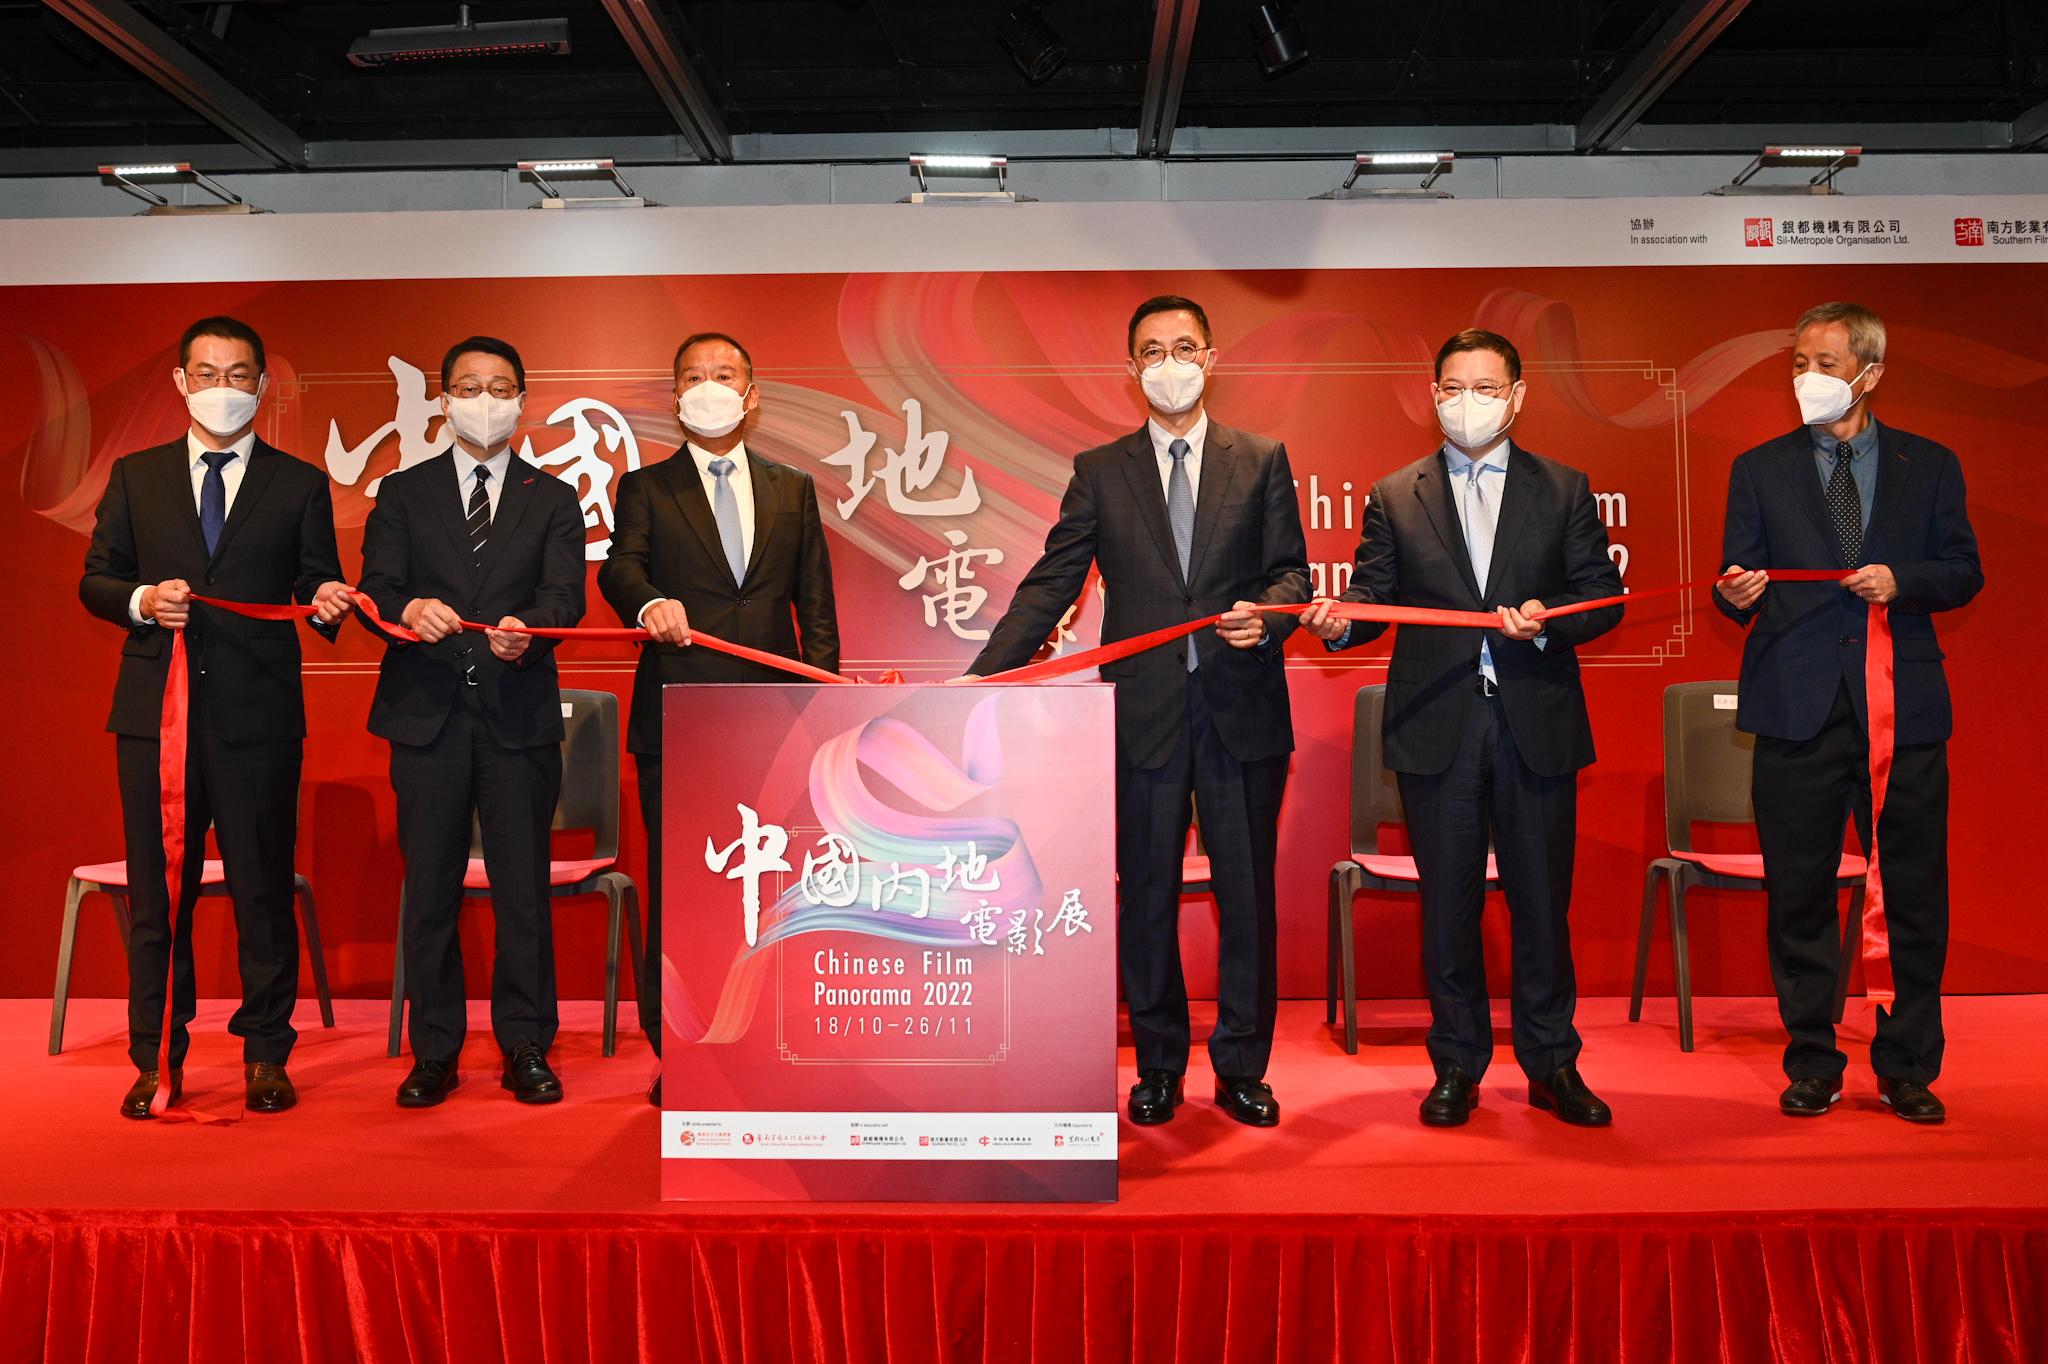 Chinese Film Panorama 2022 opened tonight (October 18) at Hong Kong City Hall. Photo shows the officiating guests at the opening ceremony (from left) the Chairman of Sil-Metropole Organisation Ltd, Mr Ding Kai; the Director of Leisure and Cultural Services, Mr Vincent Liu; Board Member of the Bauhinia Culture Group Mr Wu Baoan; the Secretary for Culture, Sports and Tourism, Mr Kevin Yeung; Deputy Director of the Department of Publicity, Cultural and Sports Affairs of the Liaison Office of the Central People's Government in the Hong Kong Special Administrative Region Mr Zhang Guoyi; and the Chairman of the South China Film Industry Workers Union, Mr Cheung Hong-tat.